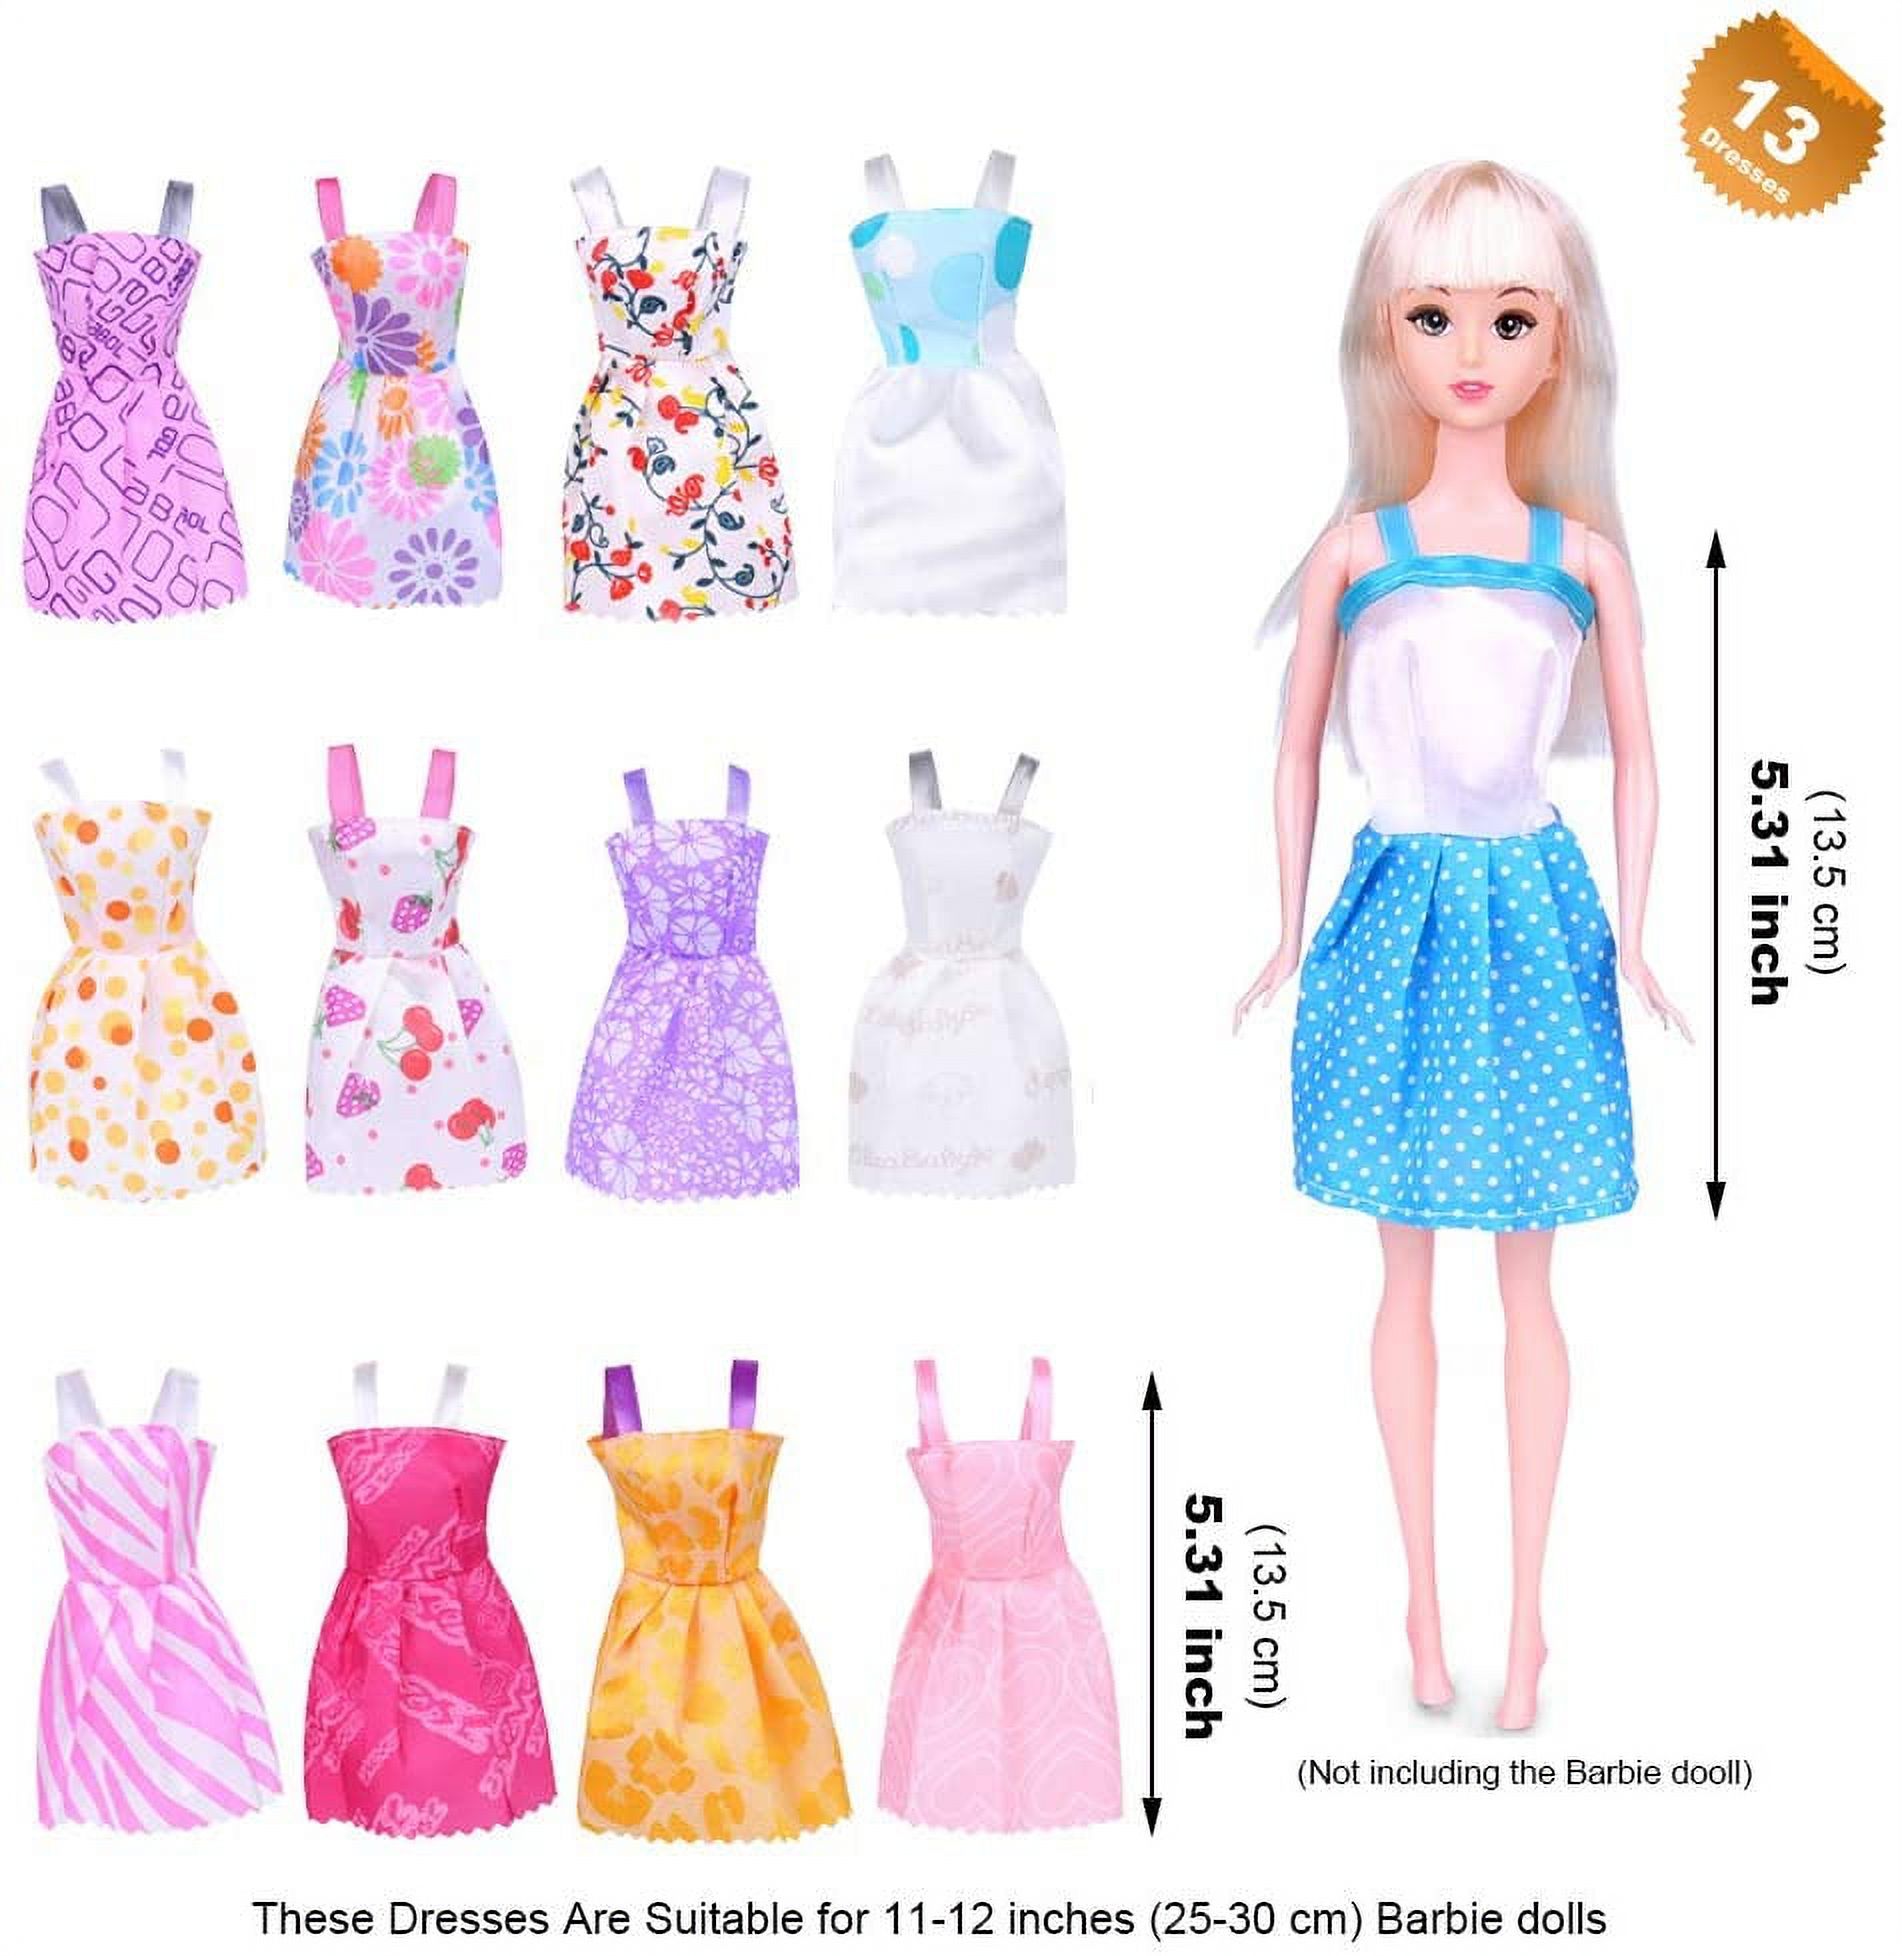 Eutenghao Eutenghao 123Pcs Clothes And Accessories For 11.5 Inch Dolls Contain 13 Party Gown Outfits Dresses For 11.5 Inch Doll Handmade Doll Wedding Dresses And 108Pcs Doll Accessories For 11.5 Inch - image 3 of 9